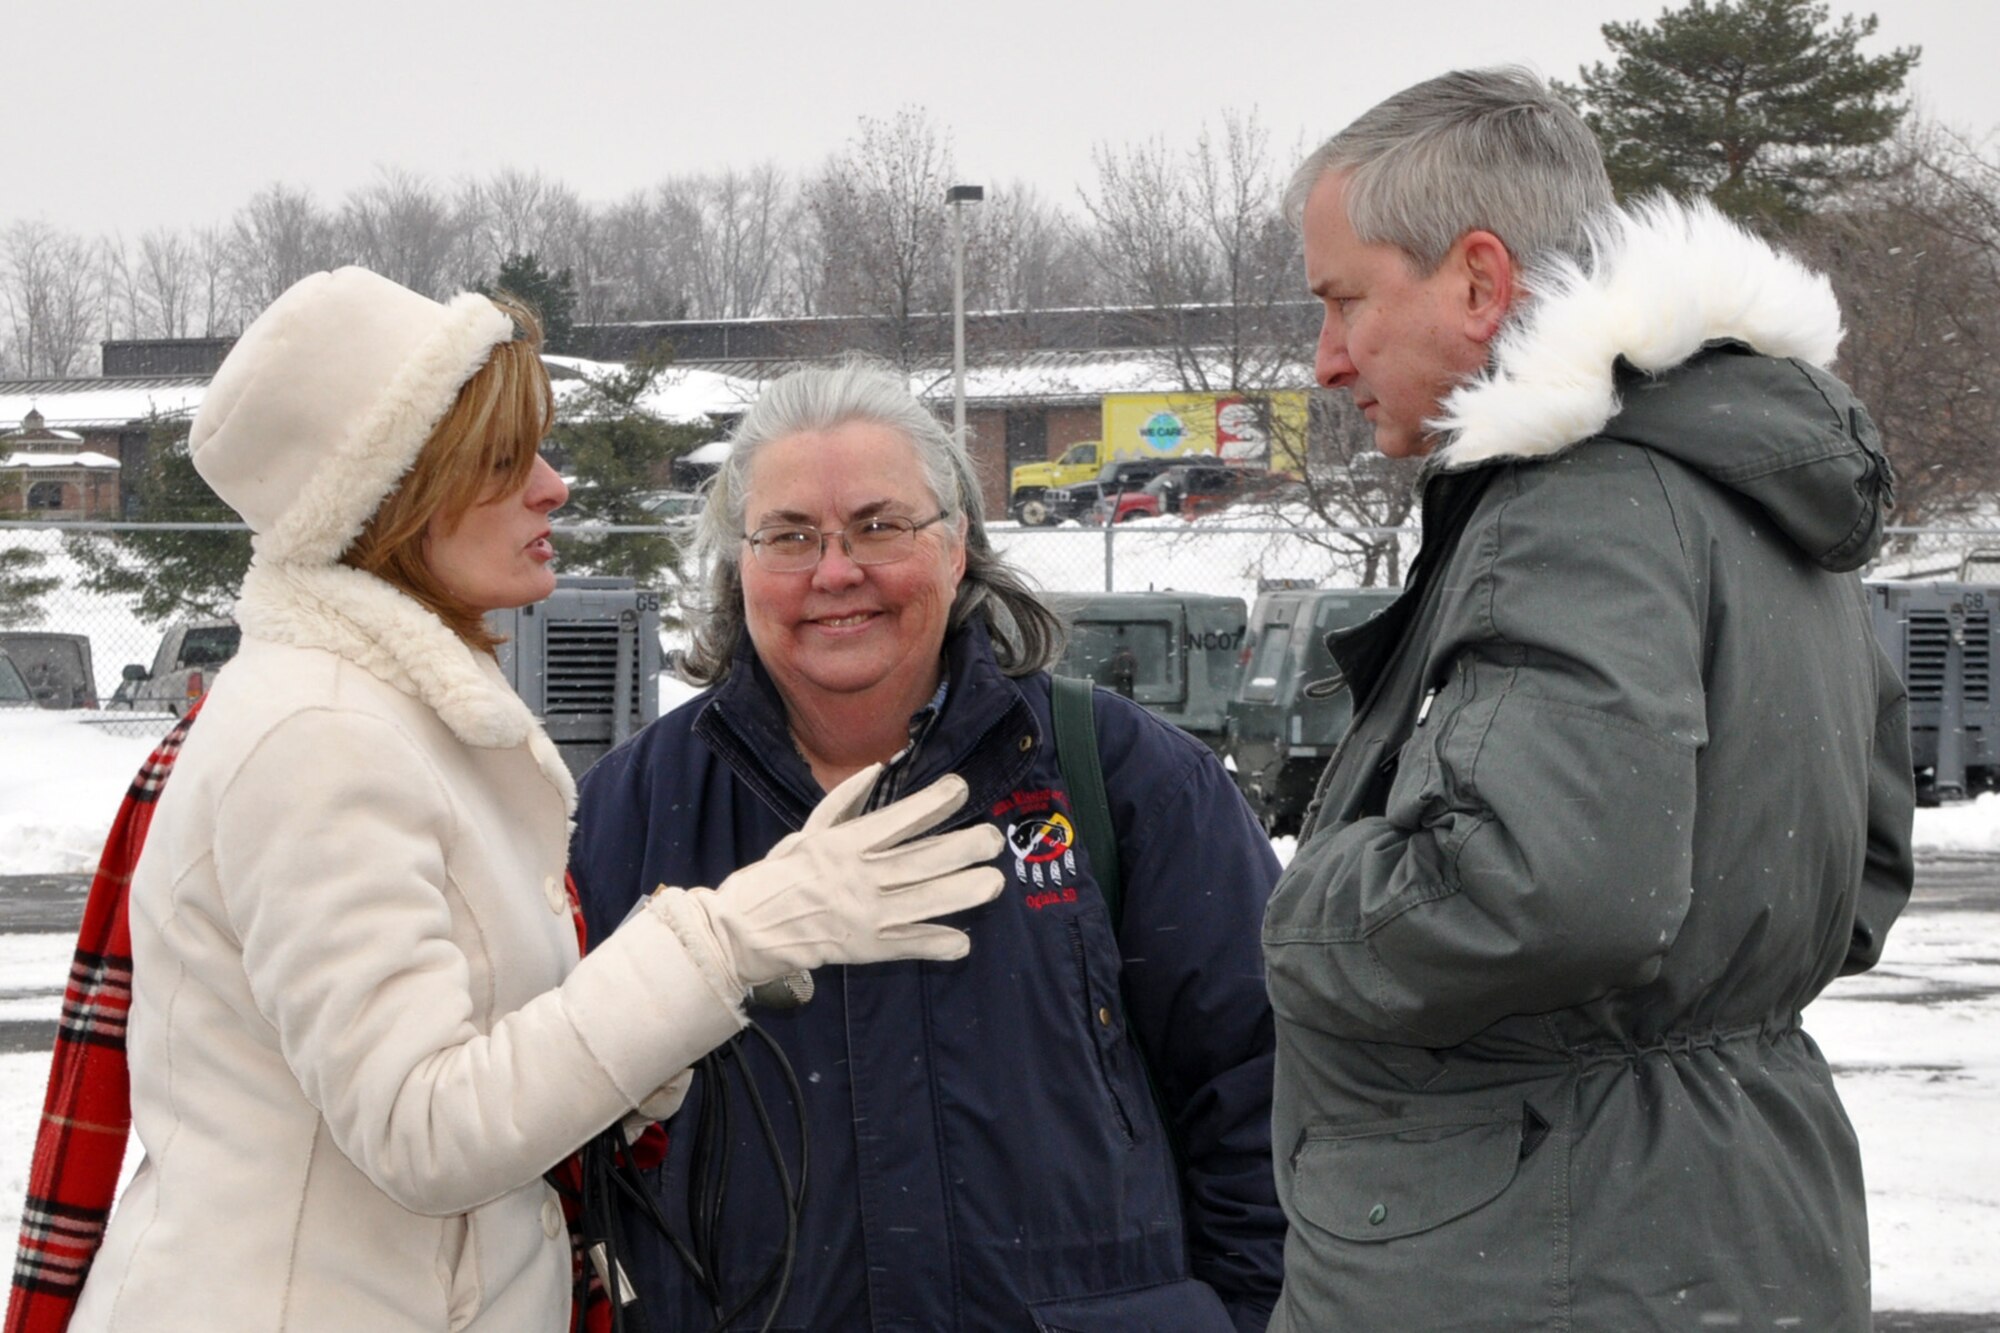 YOUNGSTOWN AIR RESERVE STATION, Ohio -- Air Force Reserve Col. Fritz Linsenmeyer (left), commander of the 910th Airlift Wing, based here, talks with Peggy Sinkovich (right), a reporter from local ABC affiliate, WYTV, and Kathleen Price (center), founder and director of Austinown, Ohio-based "Mission of Love" on the YARS flightline here, Dec. 17. They are discussing the effort to transport 47,500 pounds of humanitarian cargo collected by "Mission of Love" for residents in the communities of Santa Rita, Yora ~ Honduras affected by flooding and mudslides in hopes the aid will brighten their Christmas and holiday season. The cargo will be loaded aboard KC-10 cargo assigned to the 514th Air Mobility Wing, based at McGuire Air Force Base, NJ. Air Force Reservists from the 514th will transport the humanitarian aid to the east coast where it will then be flown to its ultimate destination in Central America. Ms. Price's non-profit organization provides humanitarian aid to those in need worldwide, especially children. The group is working with the U.S. Air Force Reserve through the Denton Program, which allows private U.S. citizens and organizations to use space available on U.S. military cargo planes to transport humanitarian goods, such as clothing, food, medical and educational supplies, agricultural equipment and vehicles, to countries in need. The program is jointly administered by a government agency known as USAID, the Department of State (DOS), and the Department of Defense (DOD). U.S. Air Force photo by Master Sgt. Bob Barko Jr.